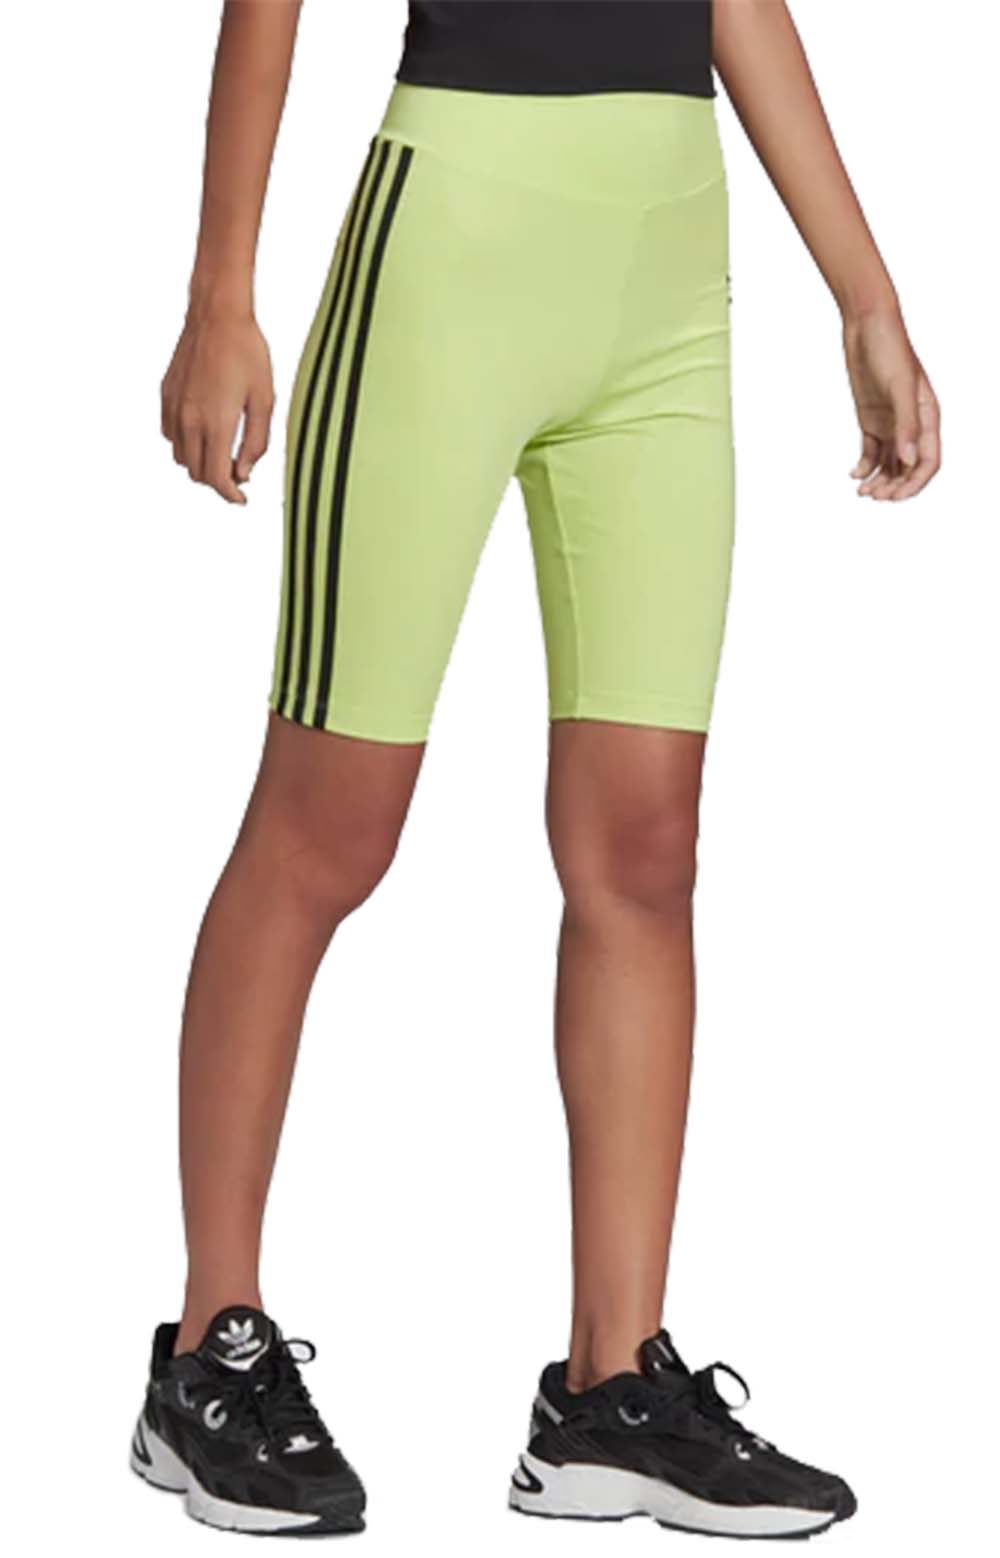 (HE0407) HW Shorts Tights - Pulse Lime